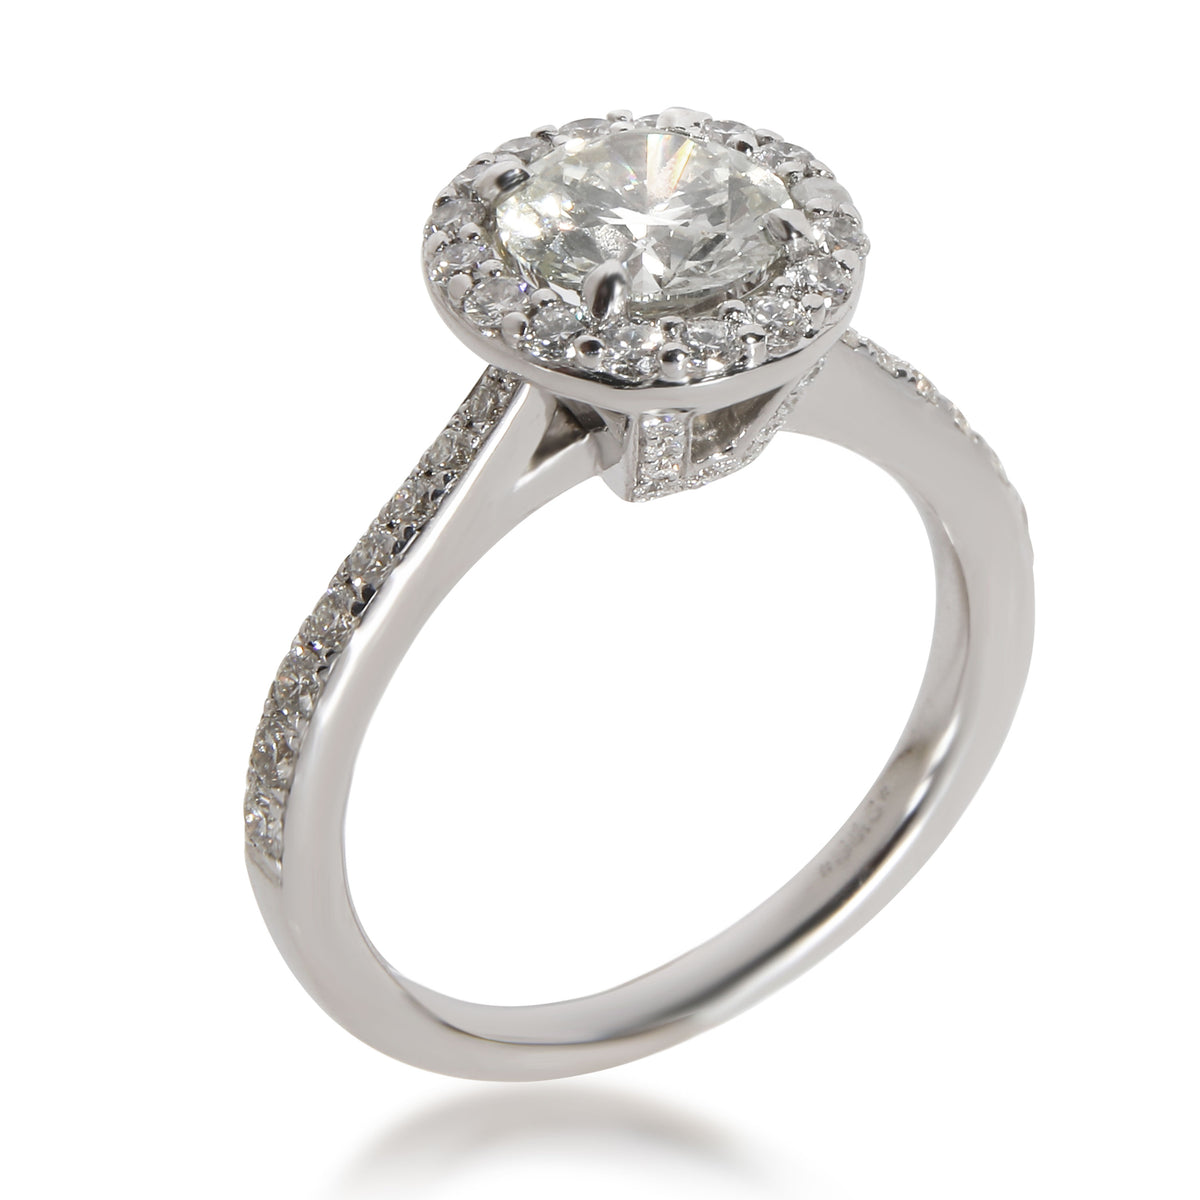 Forevermark Halo Diamond Engagement Ring in 14K White Gold L SI1 1.23 CTW